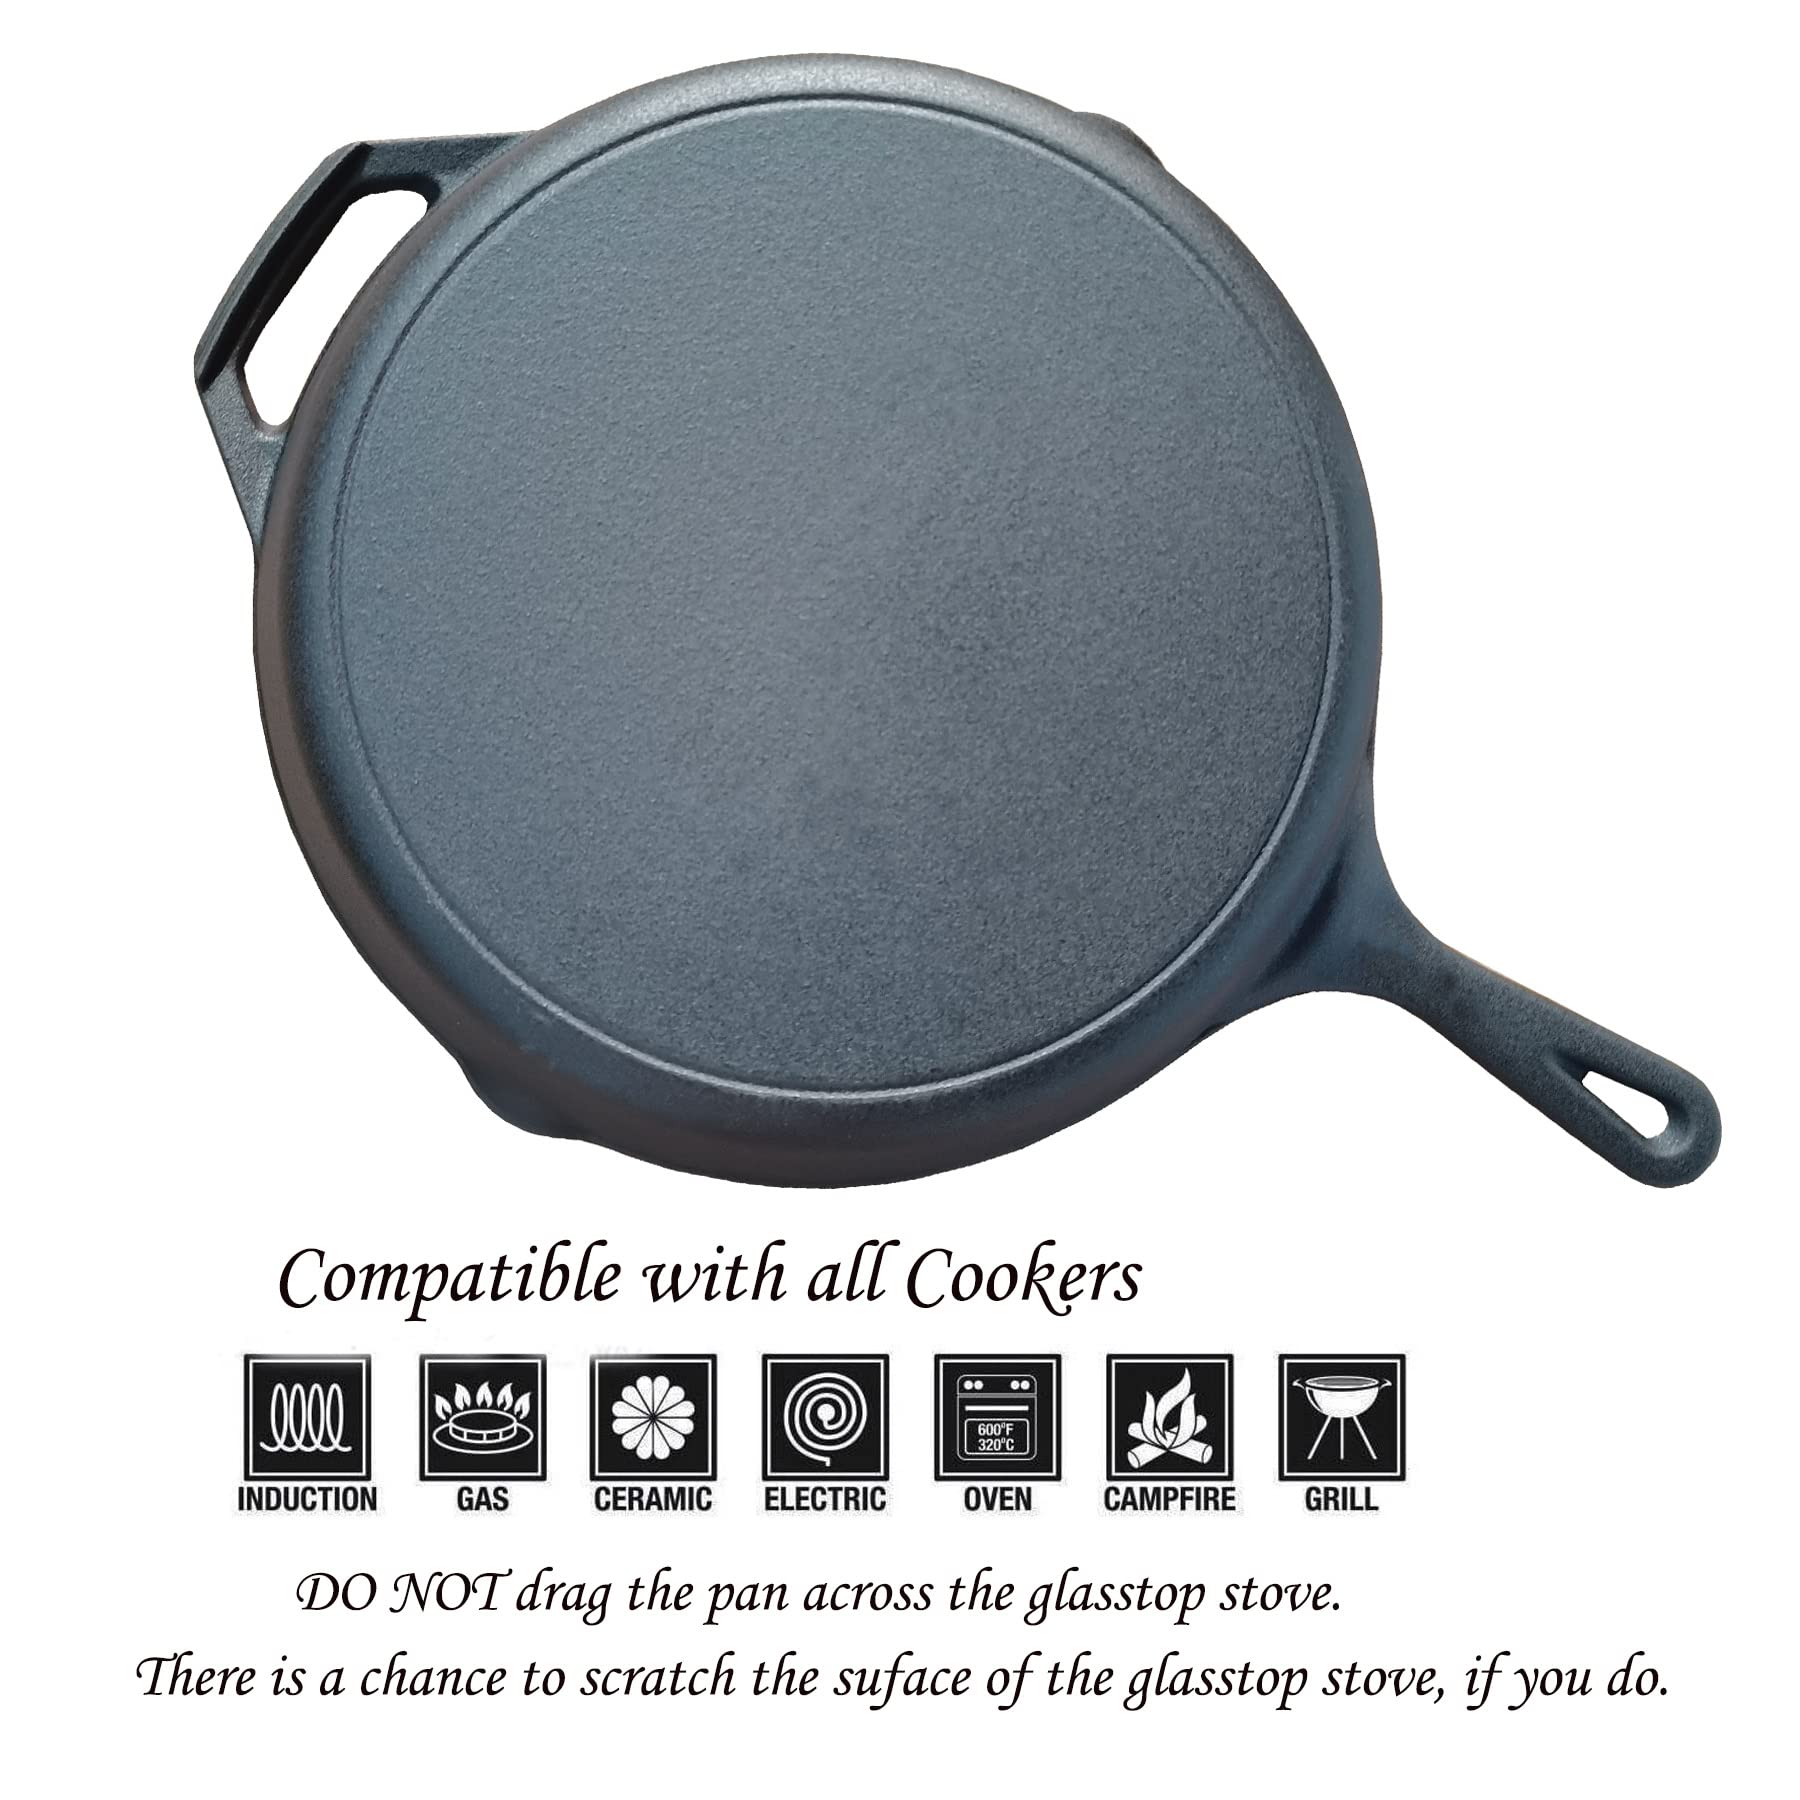 La Cuisine 12” Cast Iron Skillet Frying Pan with Matte Black Enamel Coating – Thermal Resistant Silicone holders included. Ideal for both Indoor and outdoor use, Oven Safe.